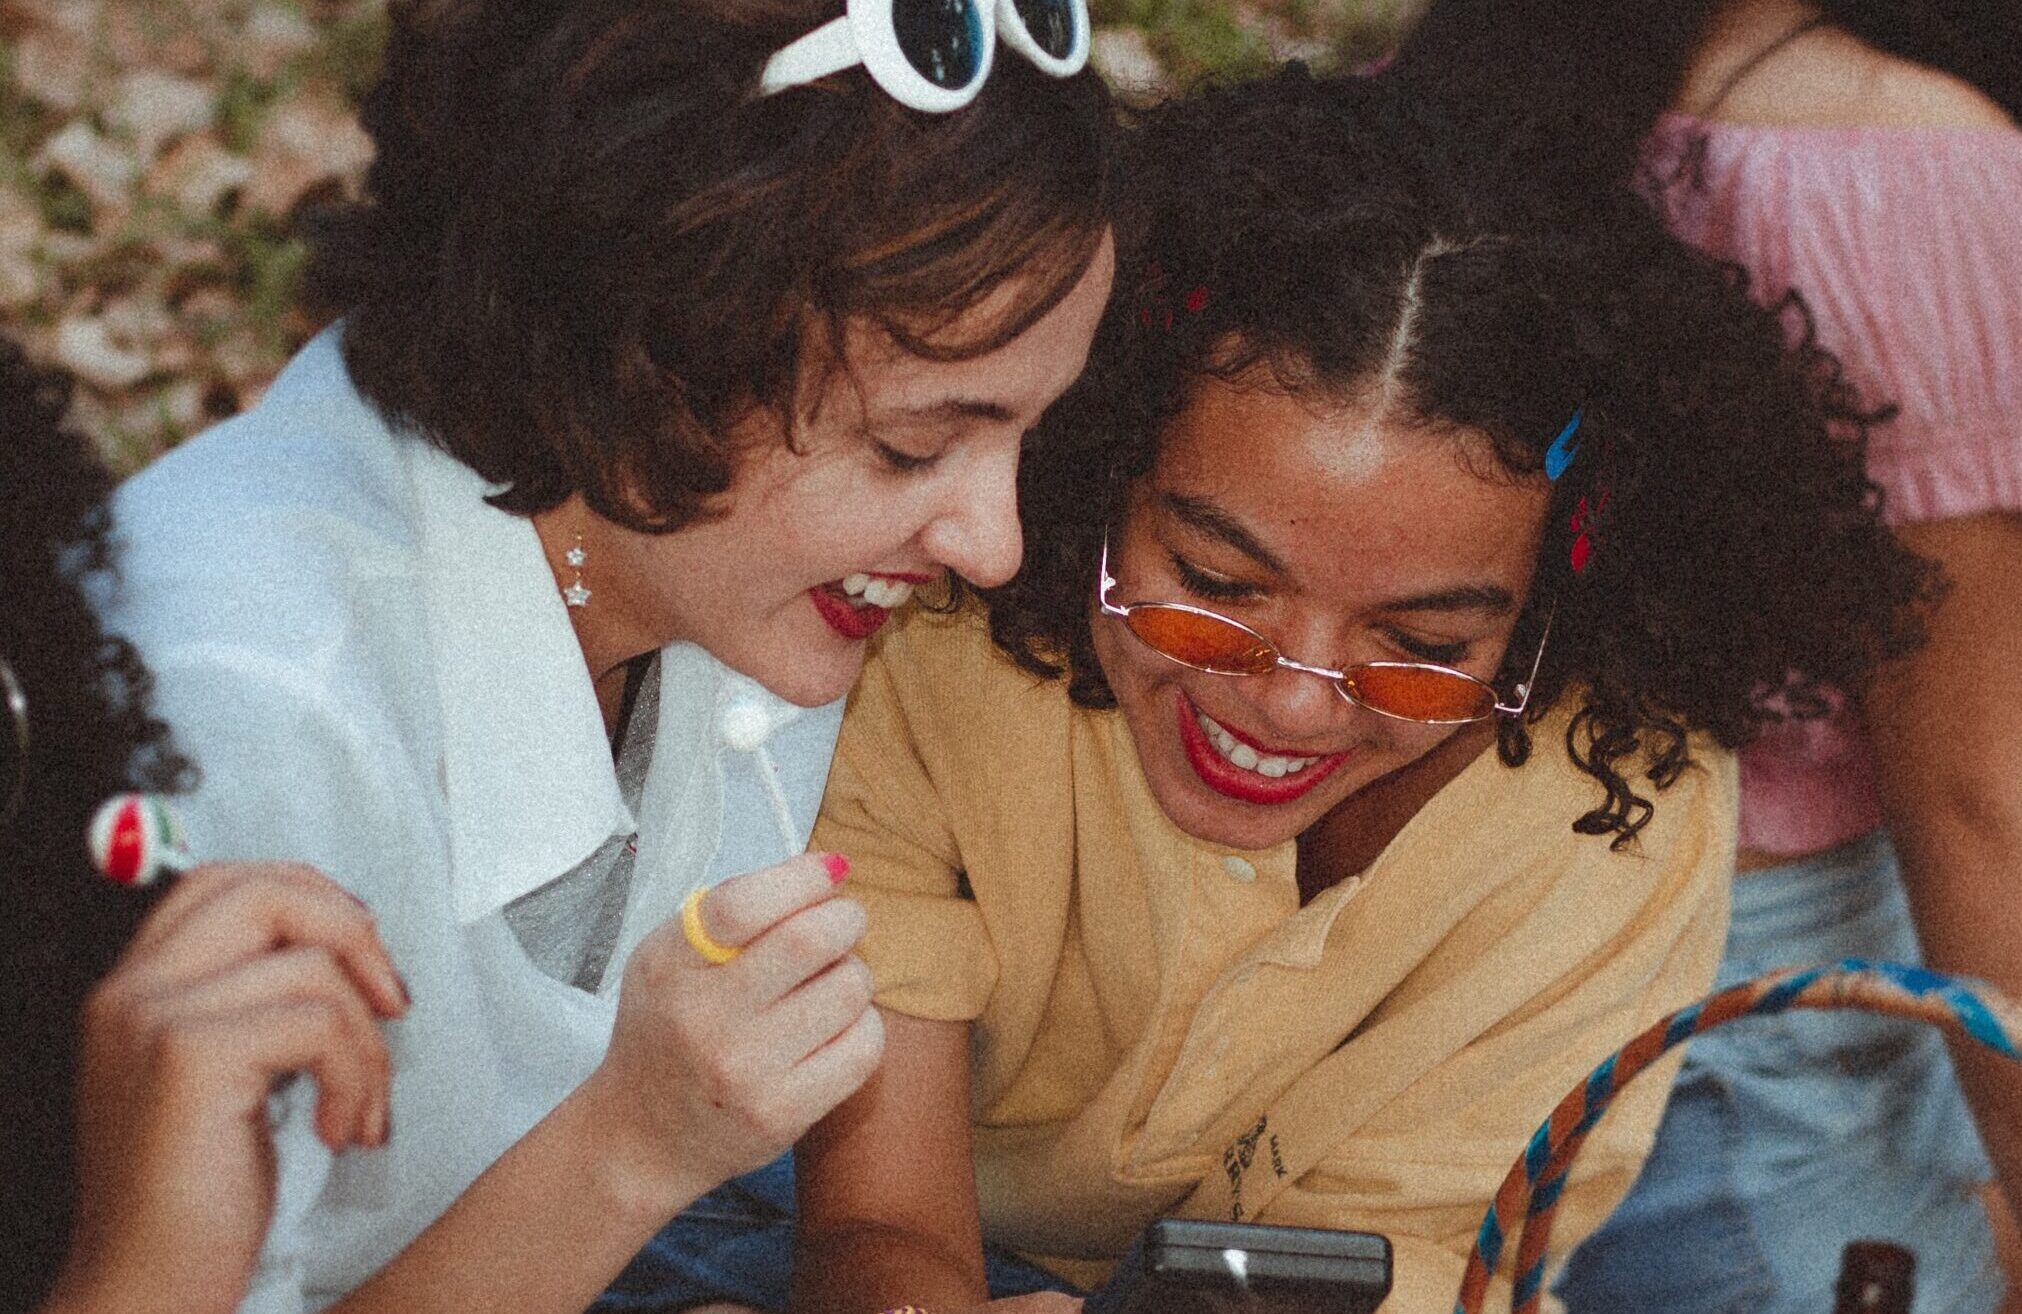 Two young women smiling while looking at a phone together